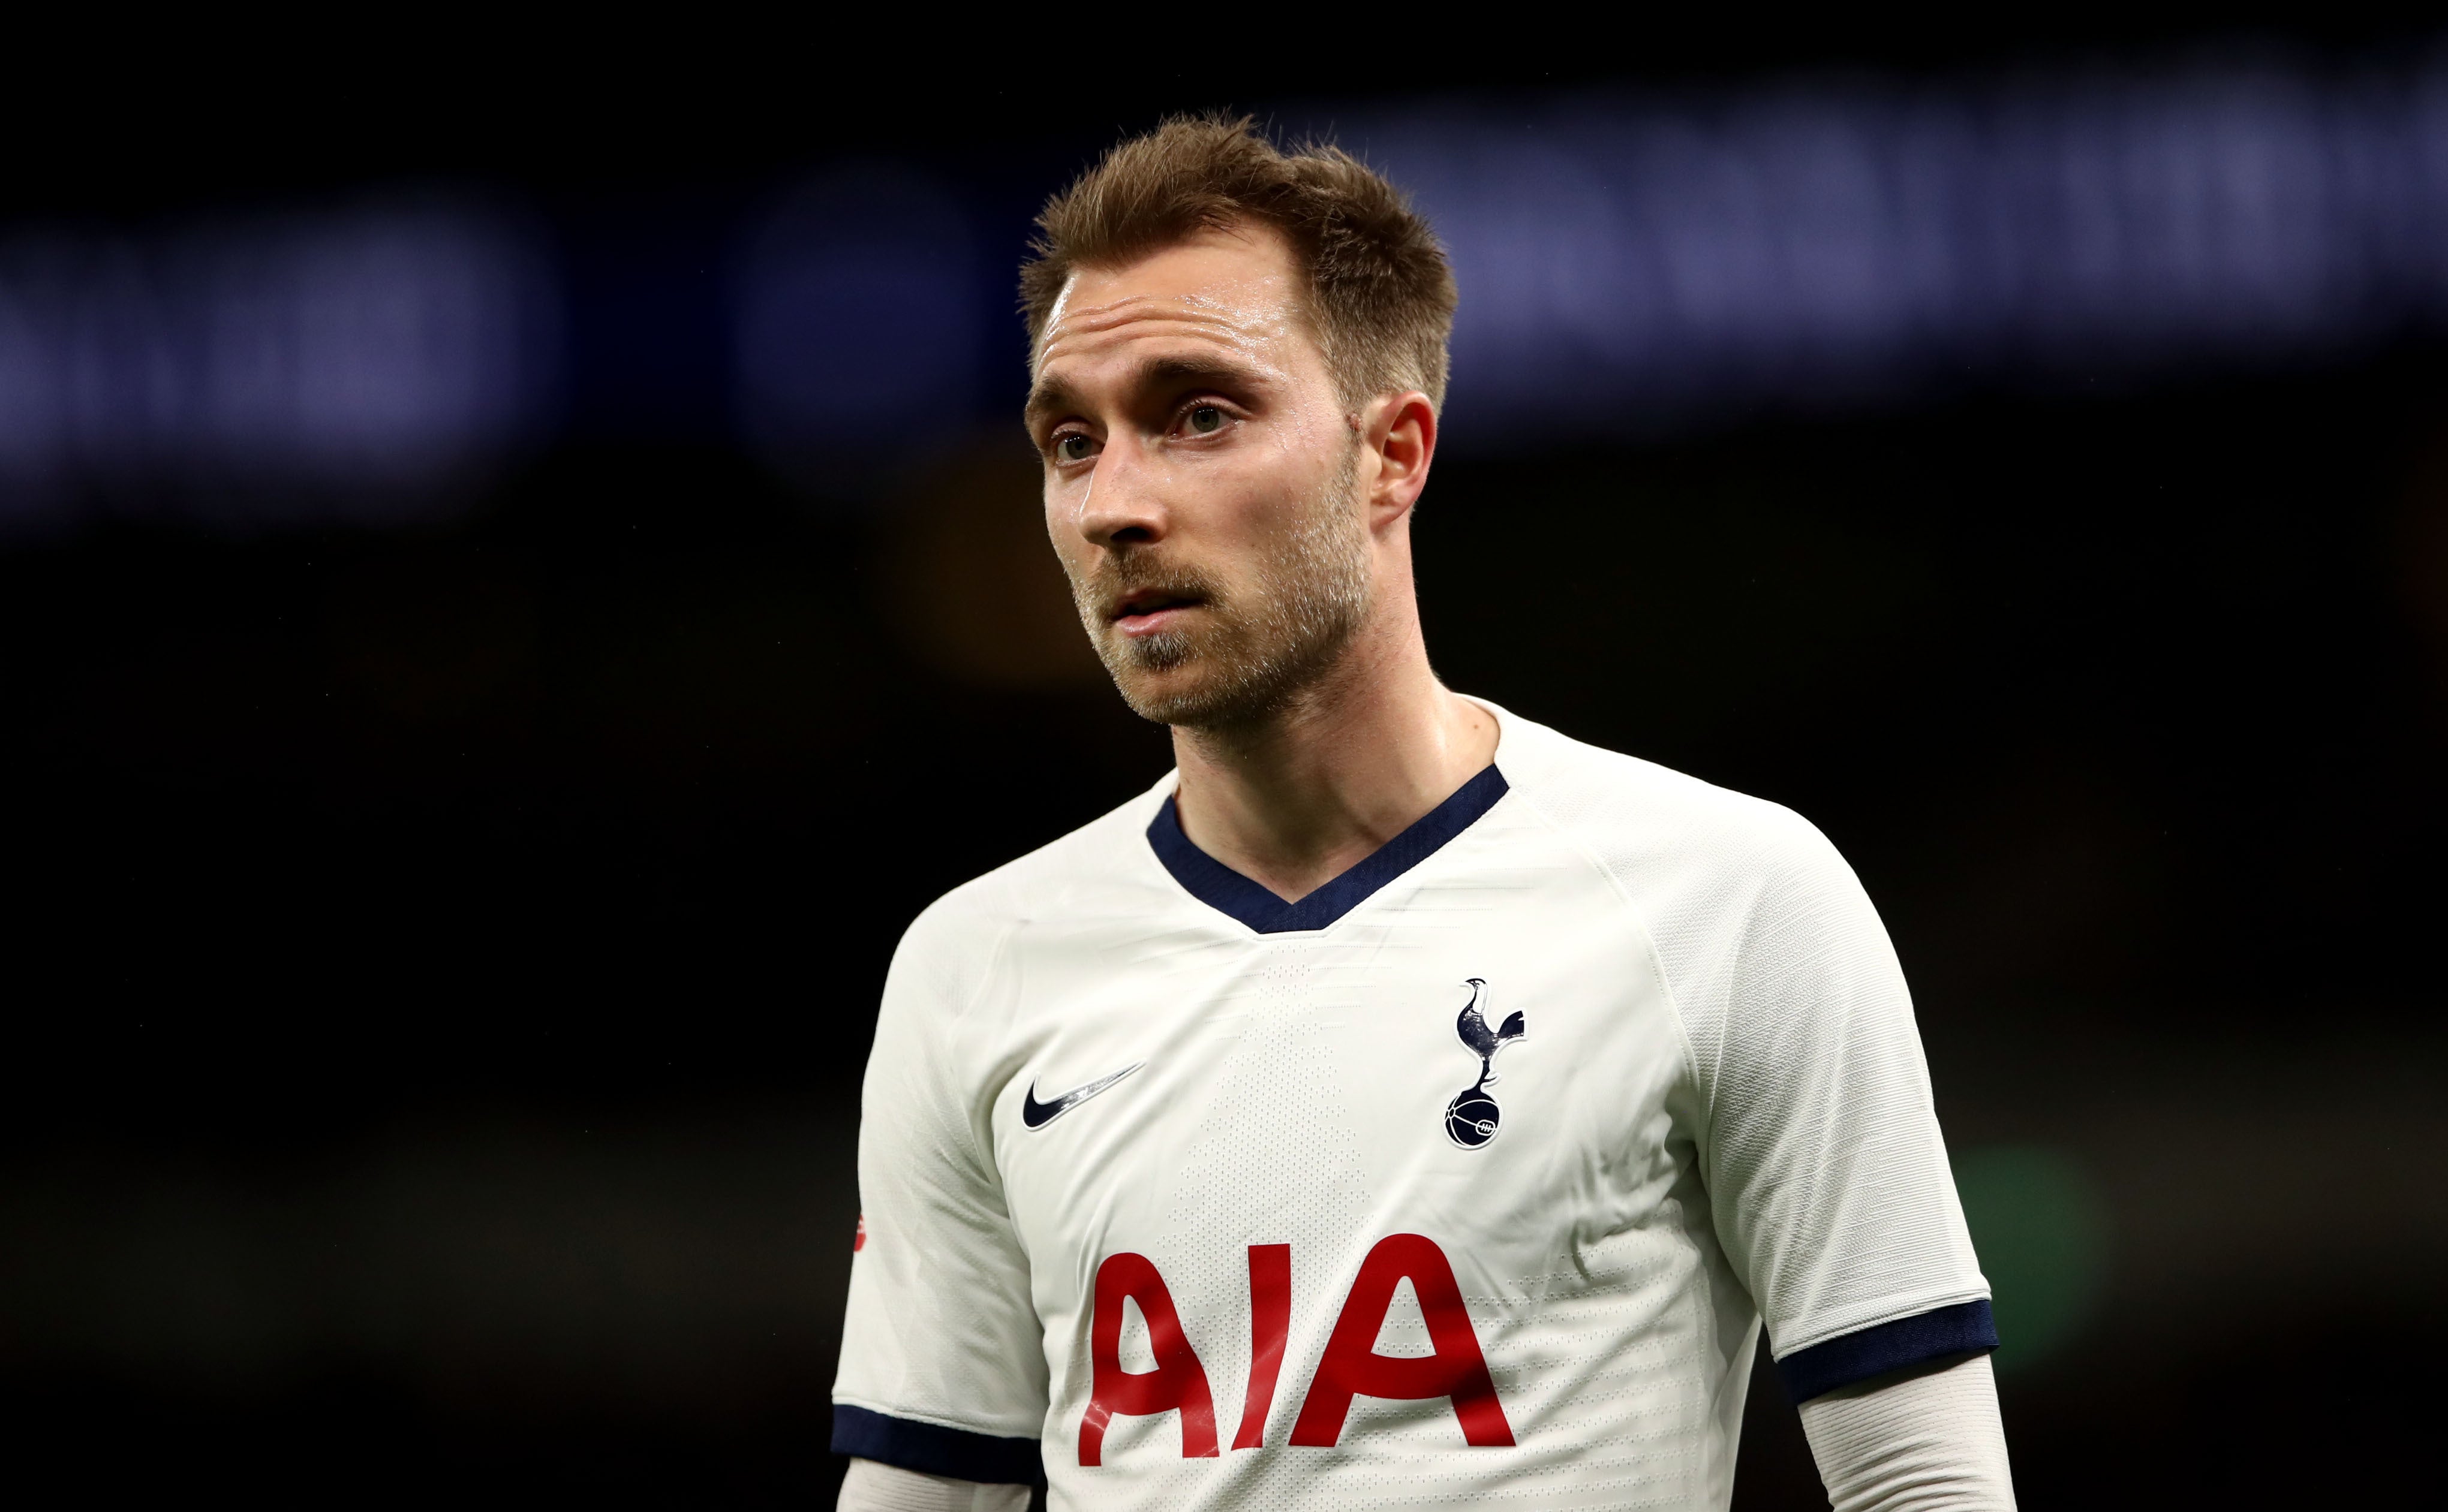 Footballer Christian Eriksen has been fitted with a defibrillator implant after suffering a cardiac arrest on 12 June, 2021.